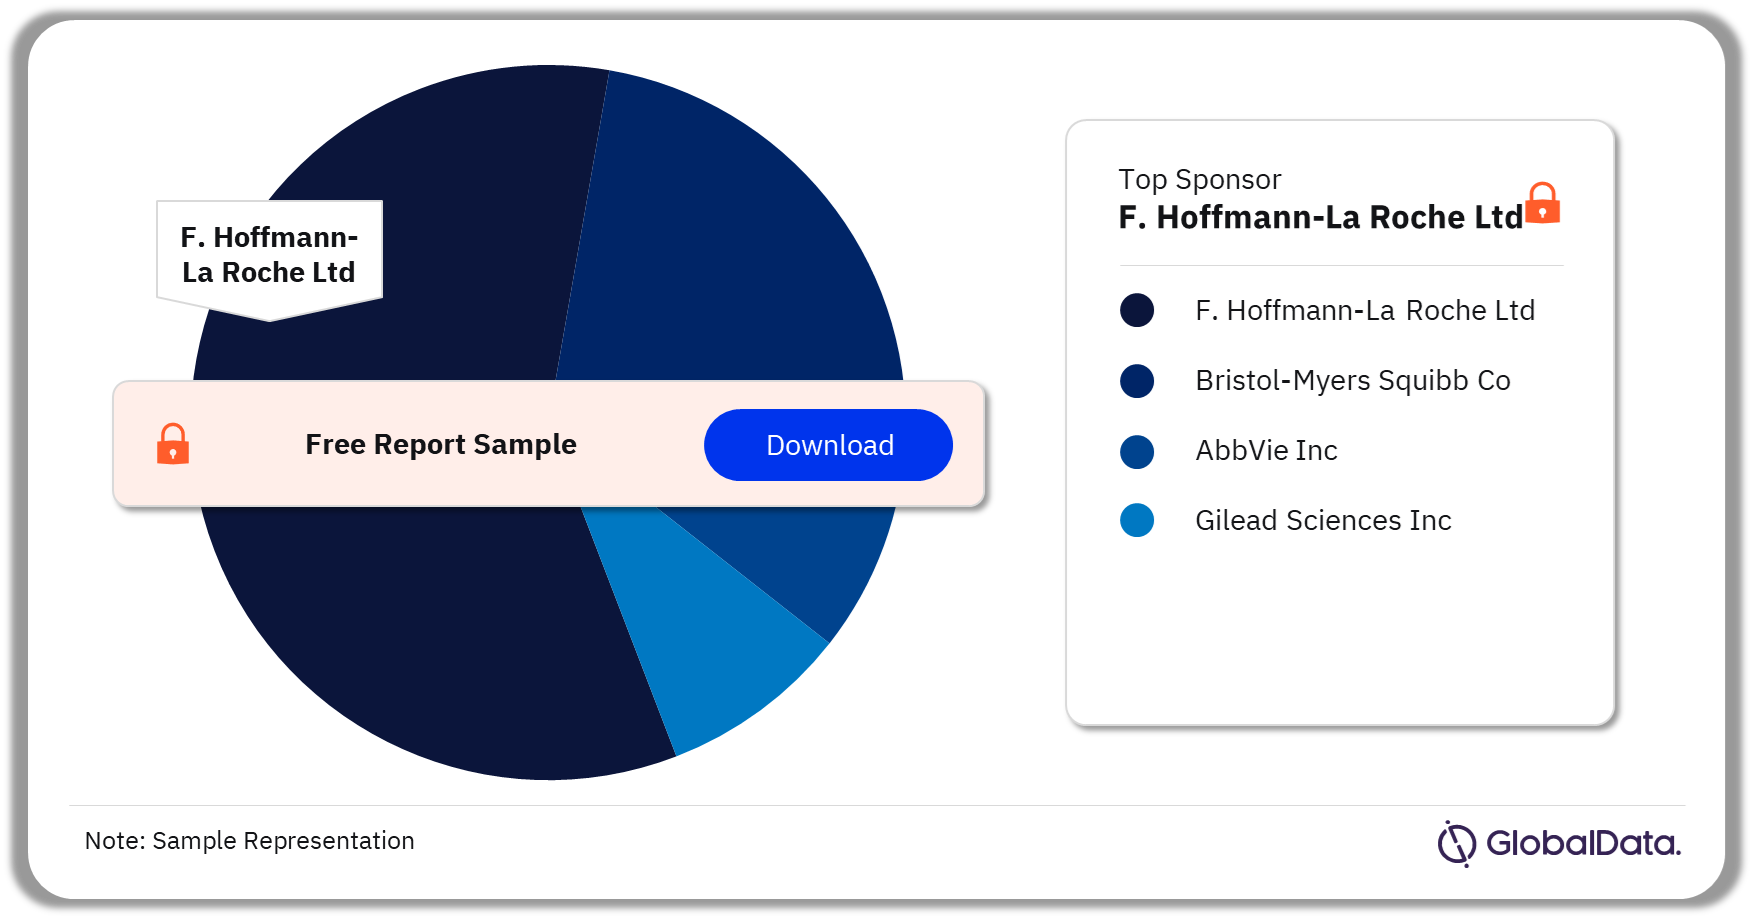 Diffuse Large B-Cell Lymphoma Clinical Trials Market Analysis by Sponsors, 2023 (%) 